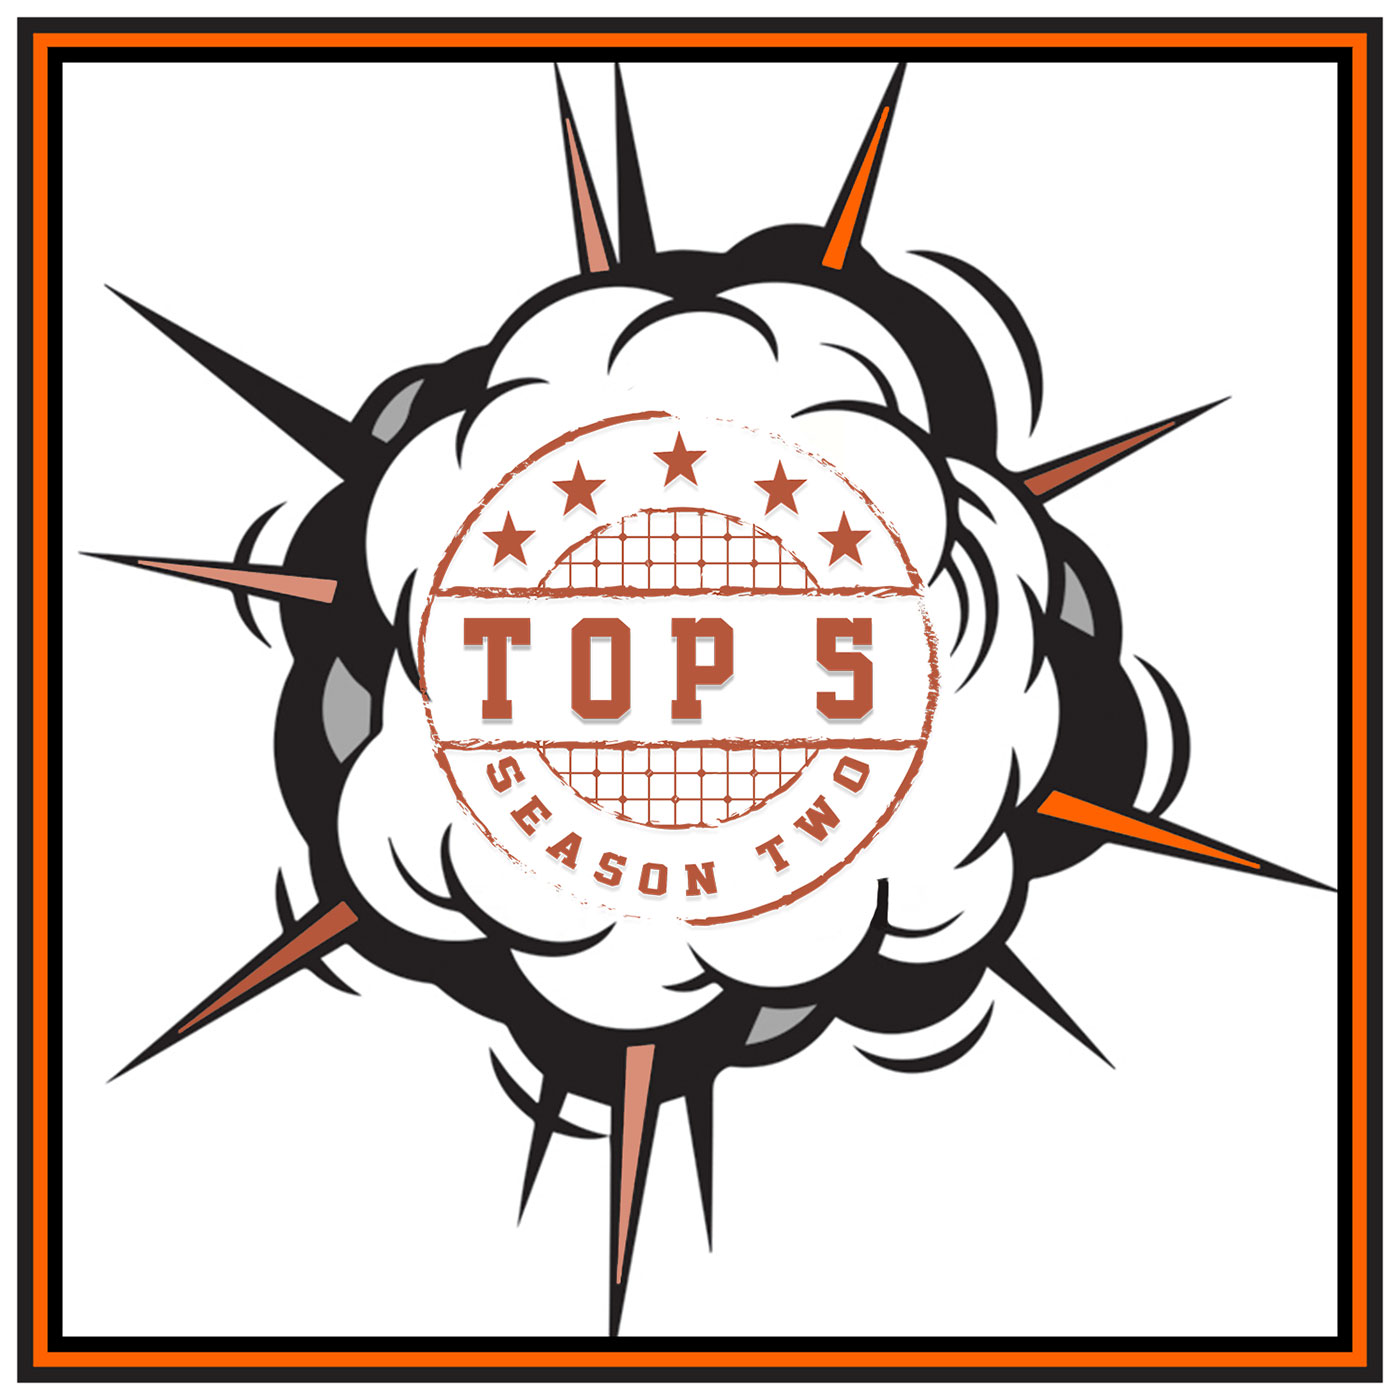 Top 5 with the Explosion Network